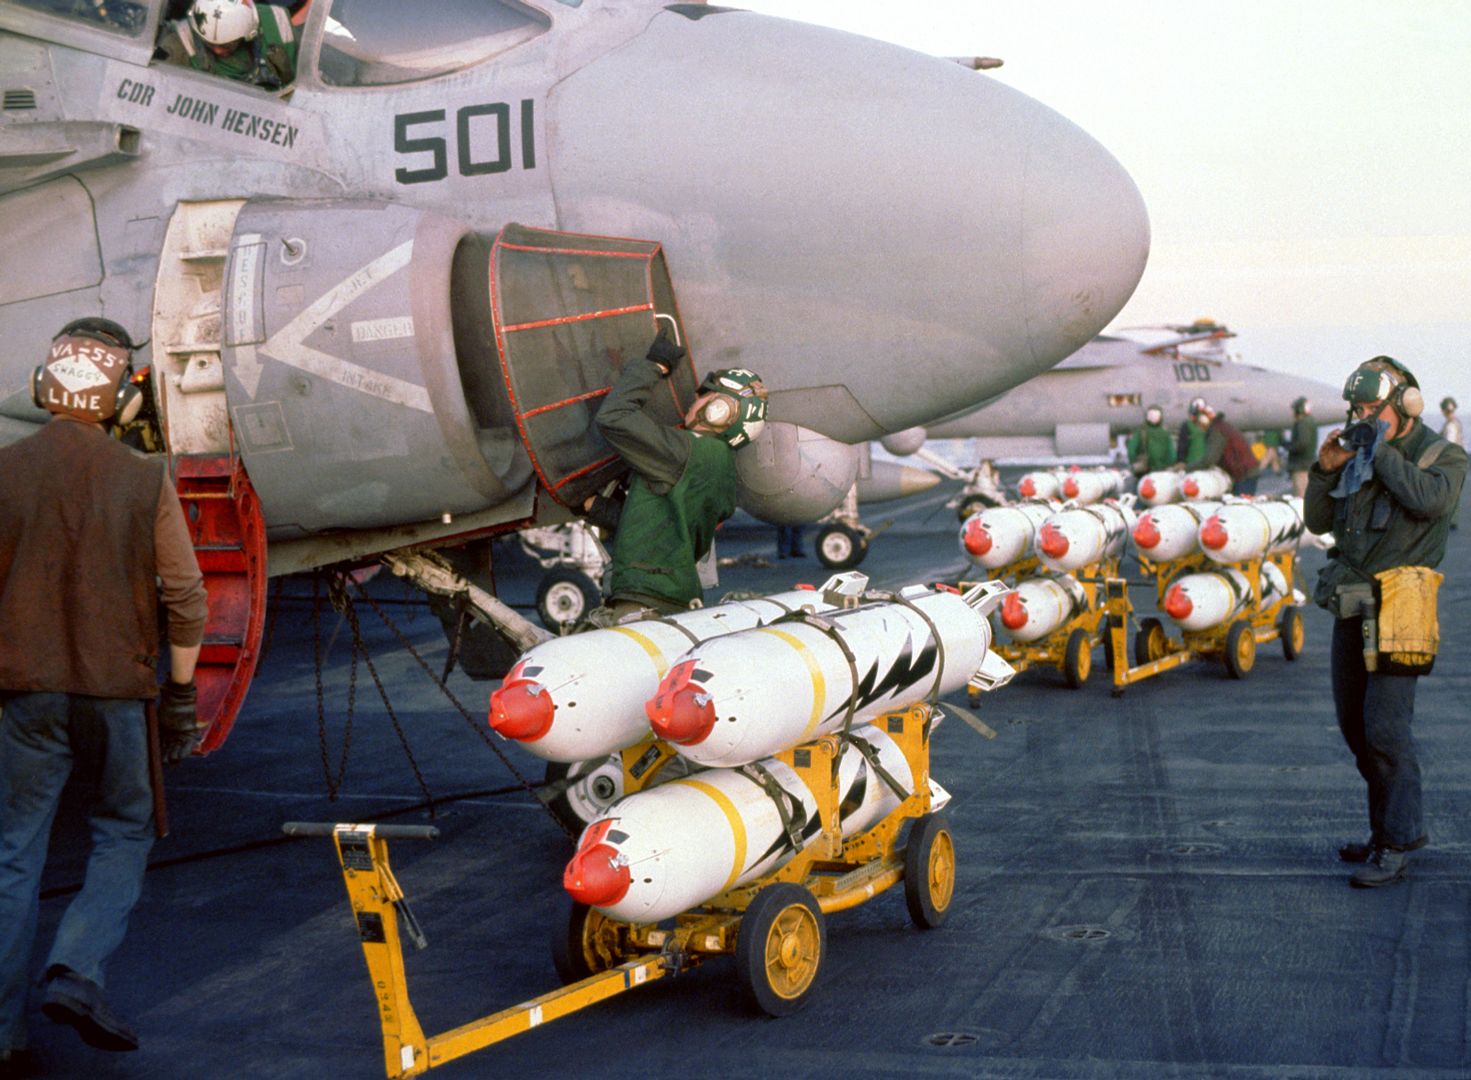  Bomb Skids Loaded With CBU 59 Cluster Bombs Are Staged In Front Of The Aircraft